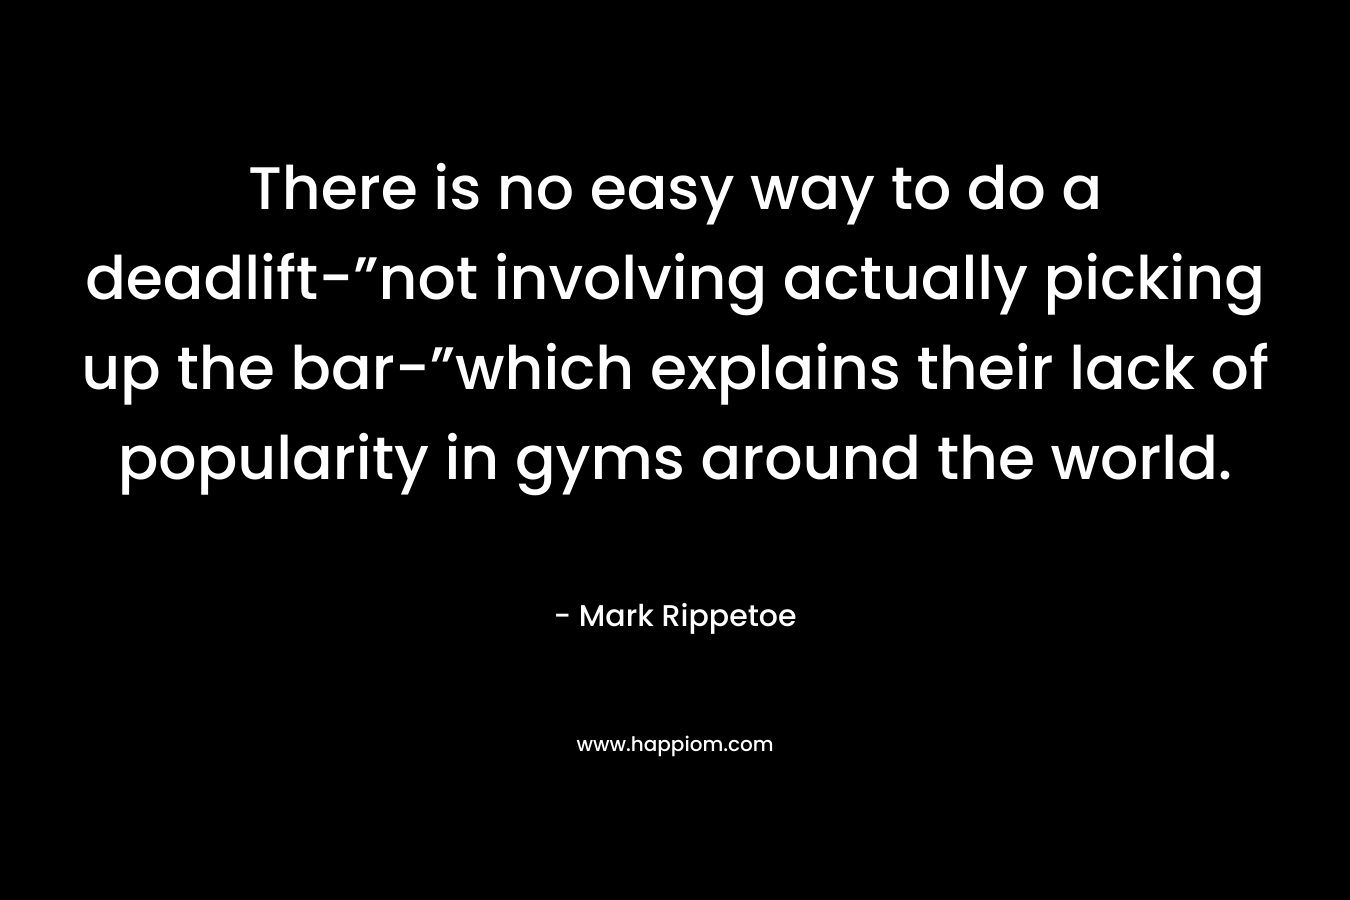 There is no easy way to do a deadlift-”not involving actually picking up the bar-”which explains their lack of popularity in gyms around the world. – Mark Rippetoe